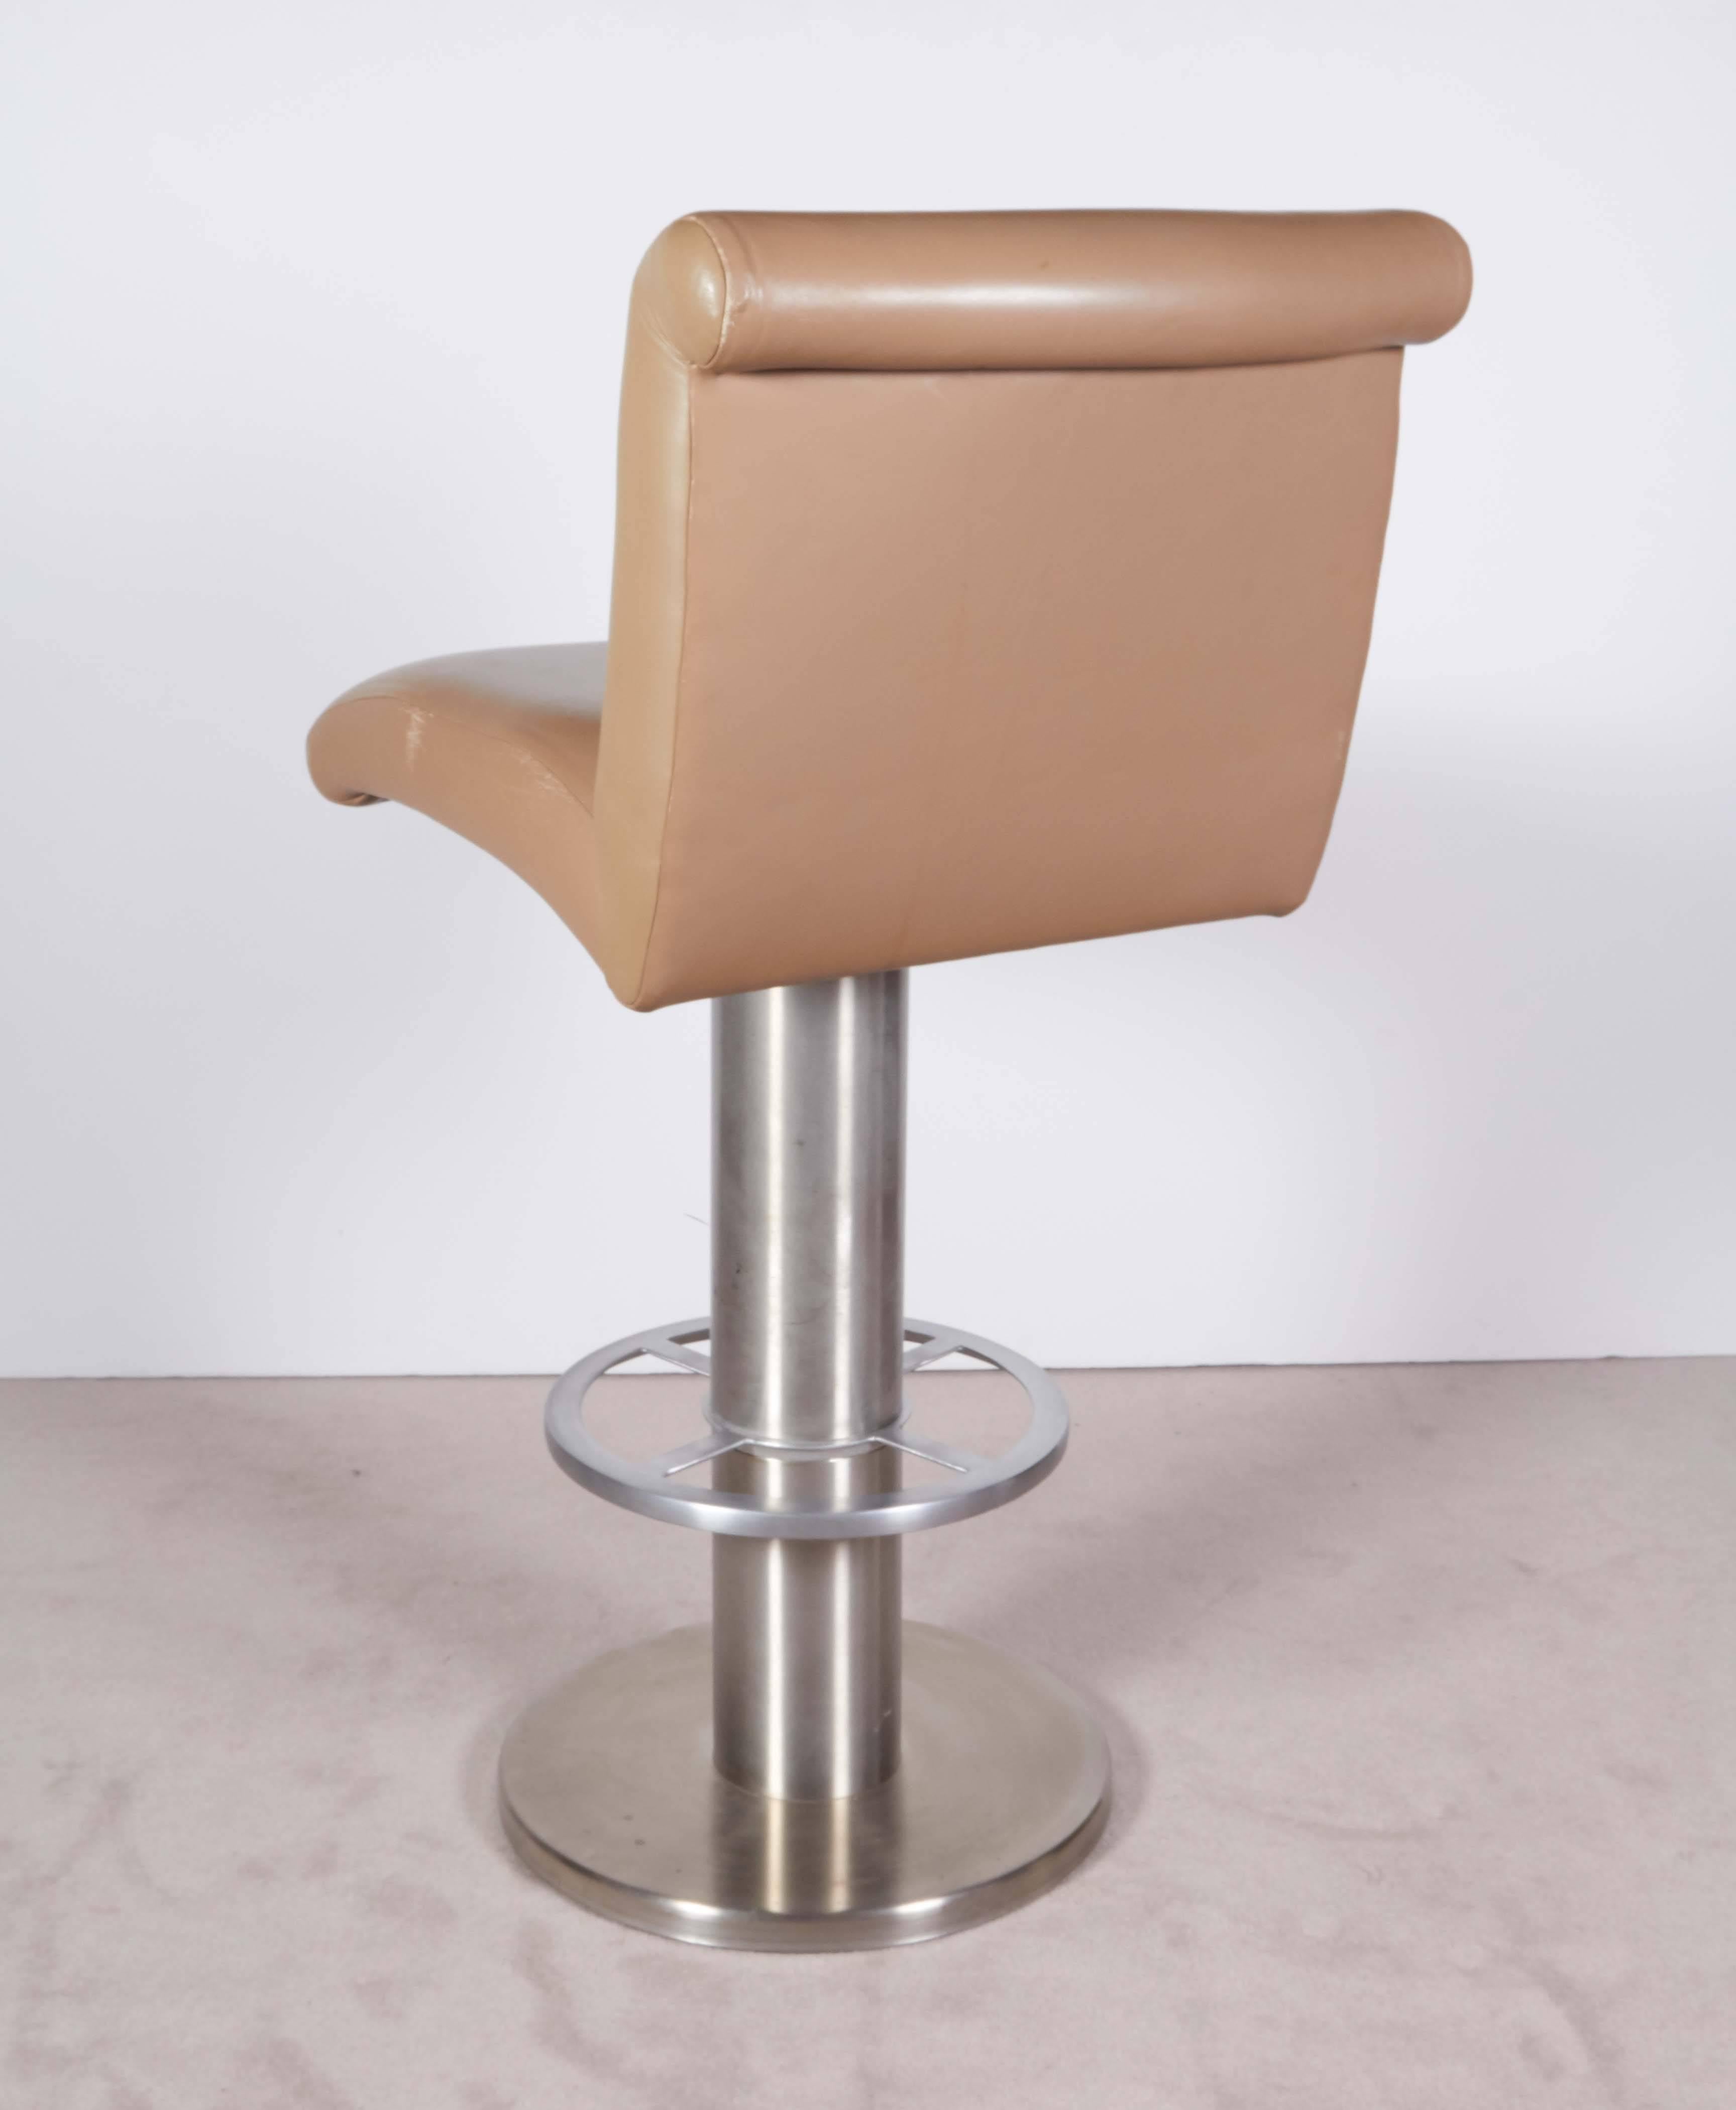 Set of Five Design For Leisure Barstools in Beige Leather on Stainless Steel 1